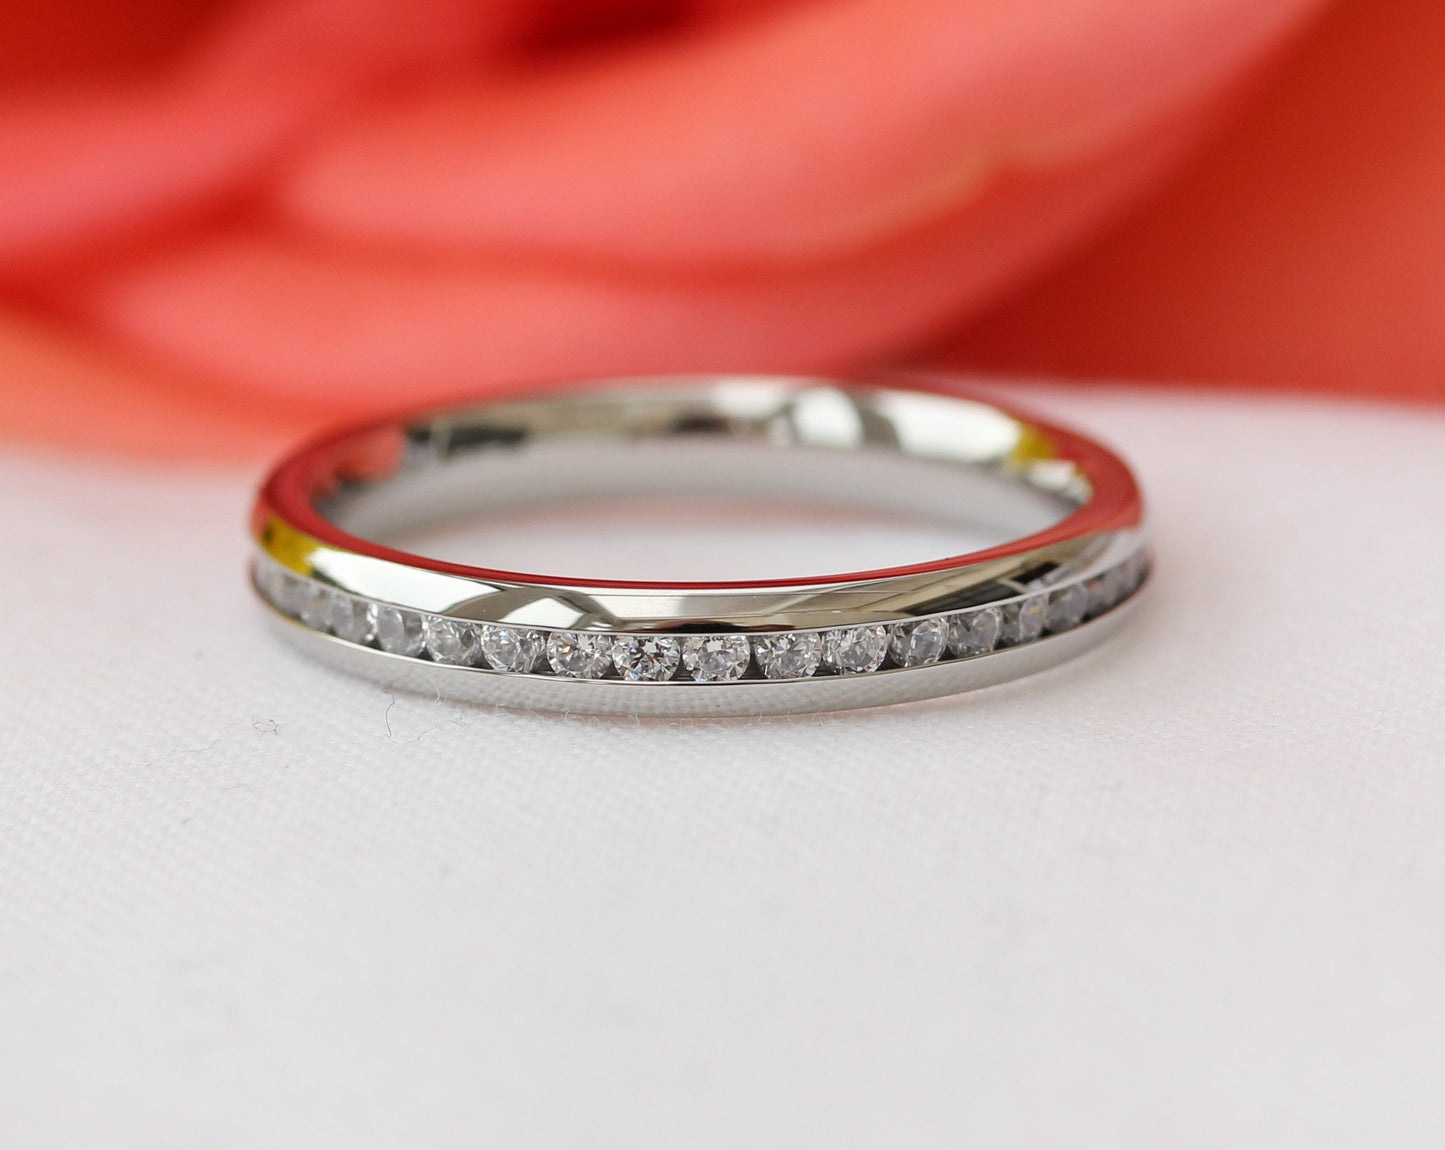 Wedding set! 1.5ct Man Made Diamond Simulant cathedral solitaire and matching eternity ring in Titanium or White Gold